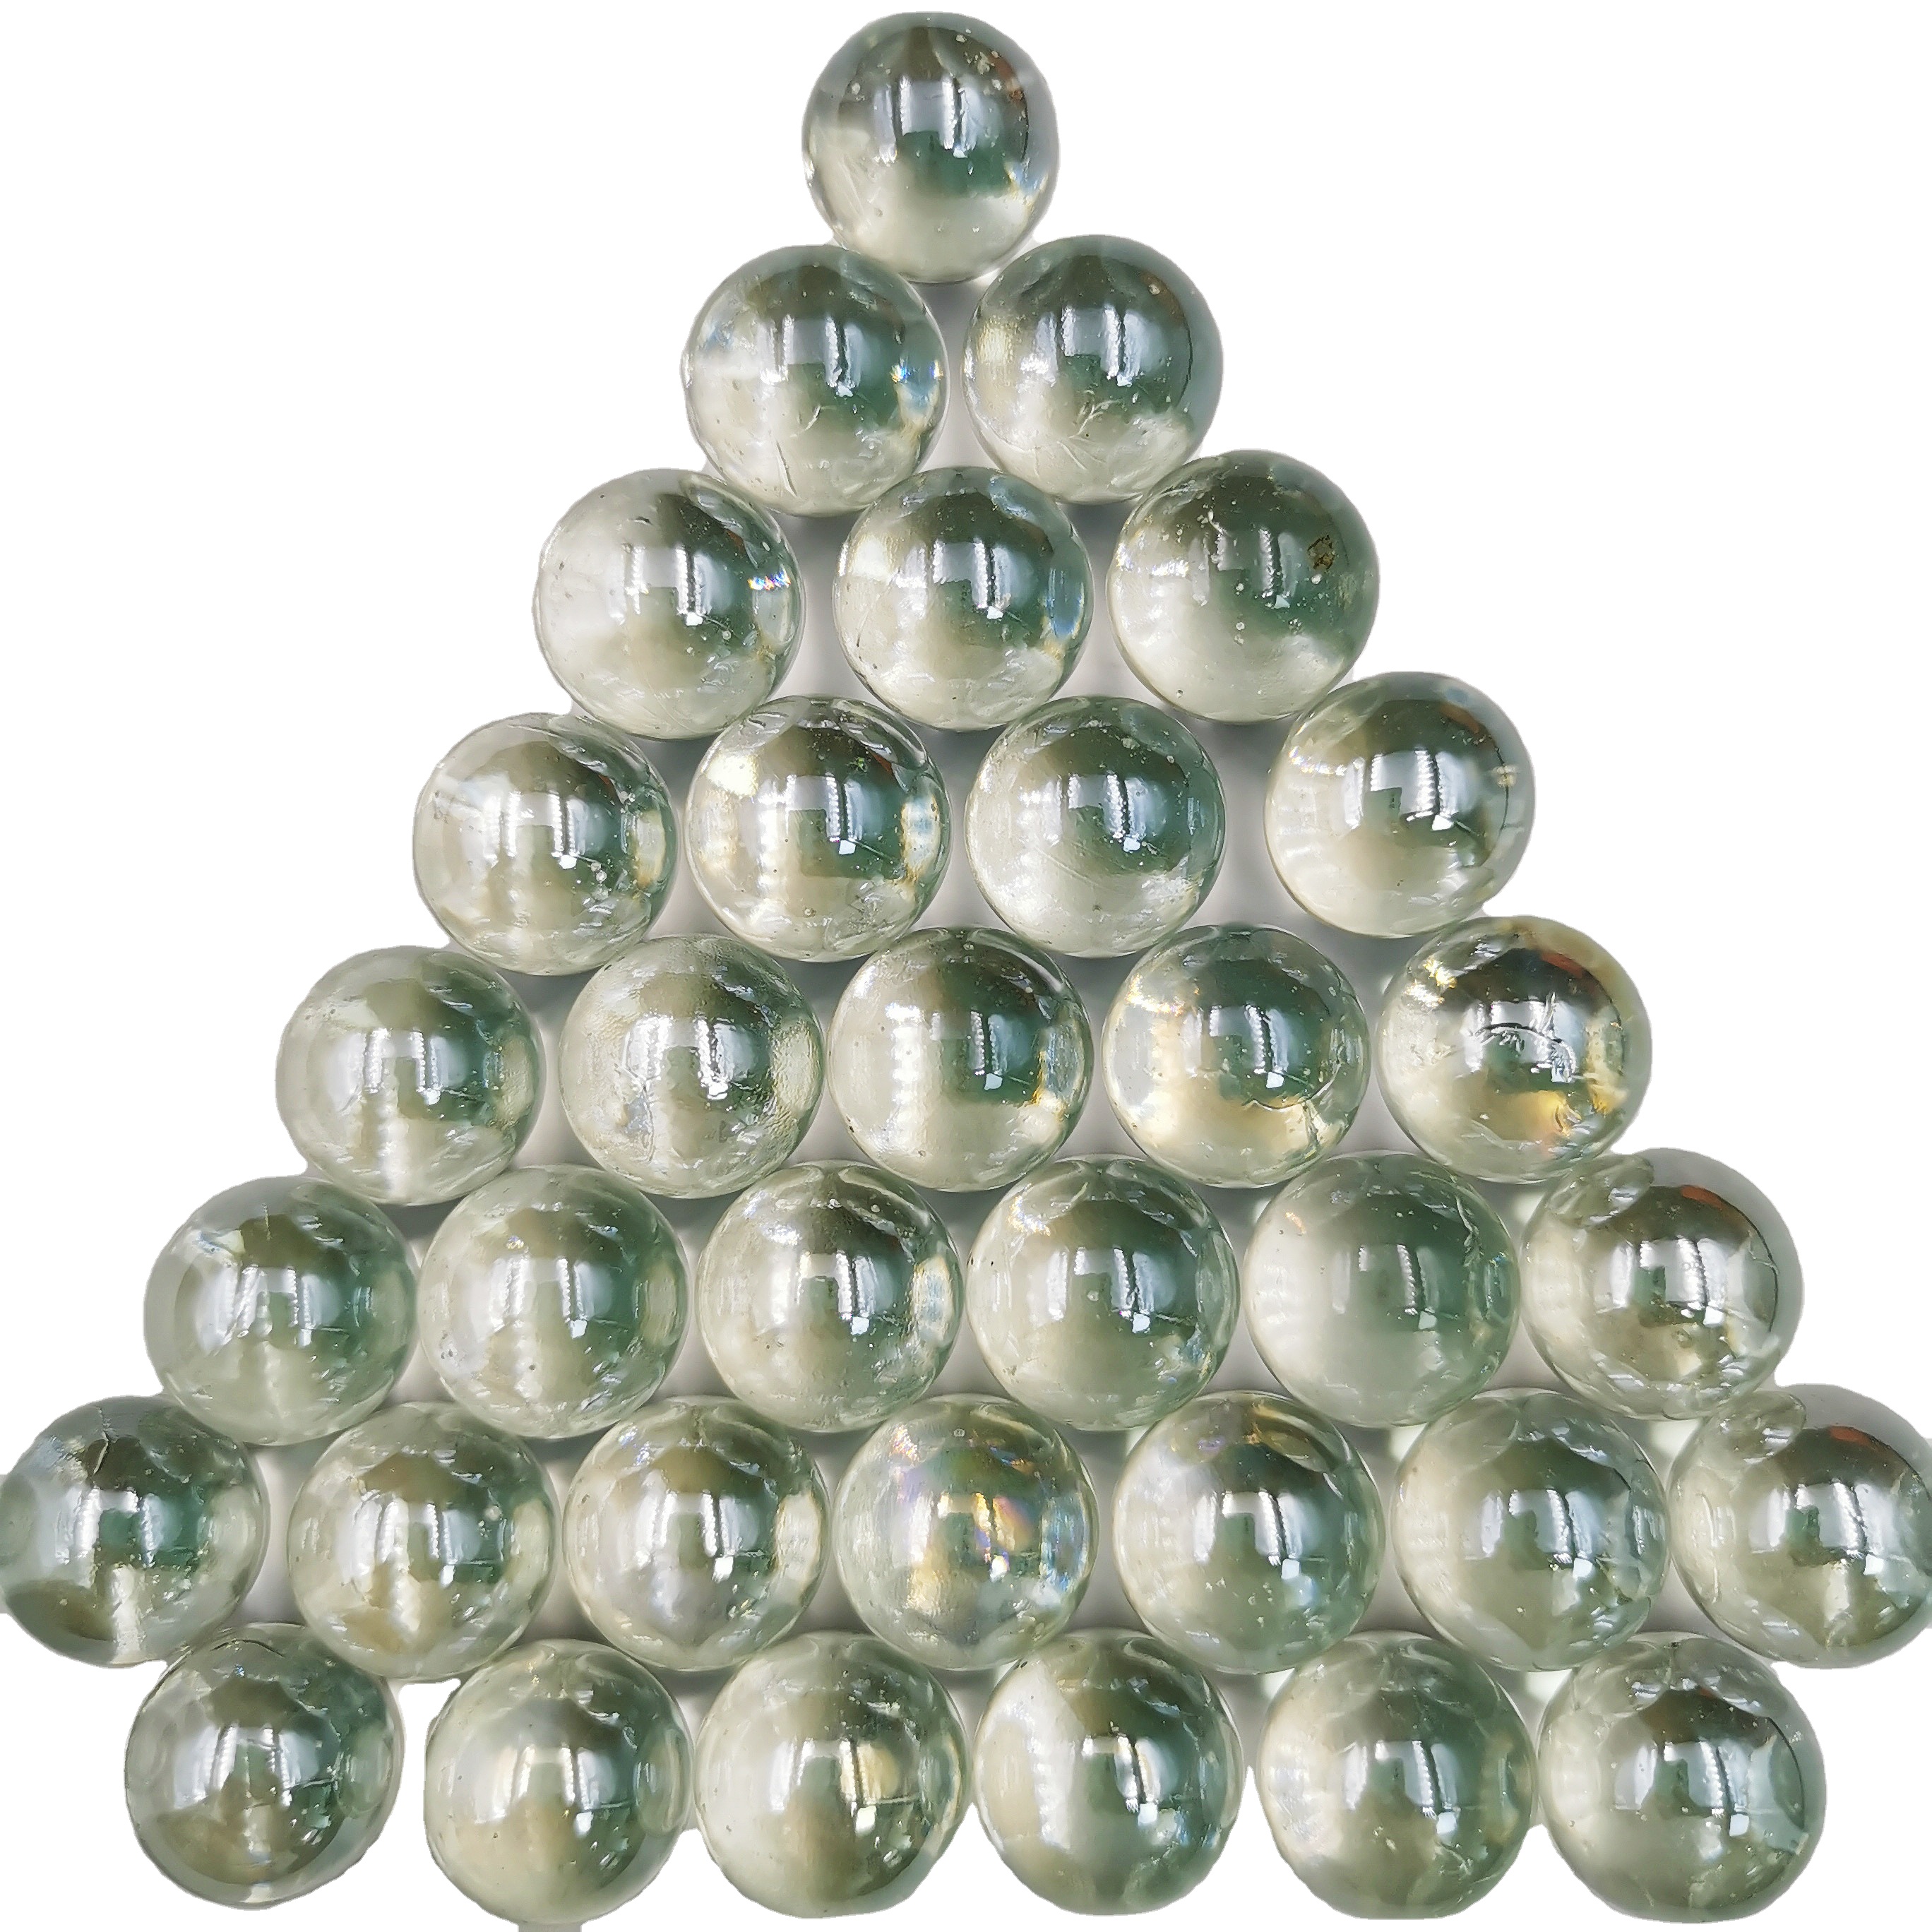 100% Original Transparent Colored Glass Marbles - Hot sale 9mm 10mm 11mm 12mm 13mm 14mm 15mm 16mm 17mm 19mm round clear glass marble ball for spray paint aerosol cans – Chico